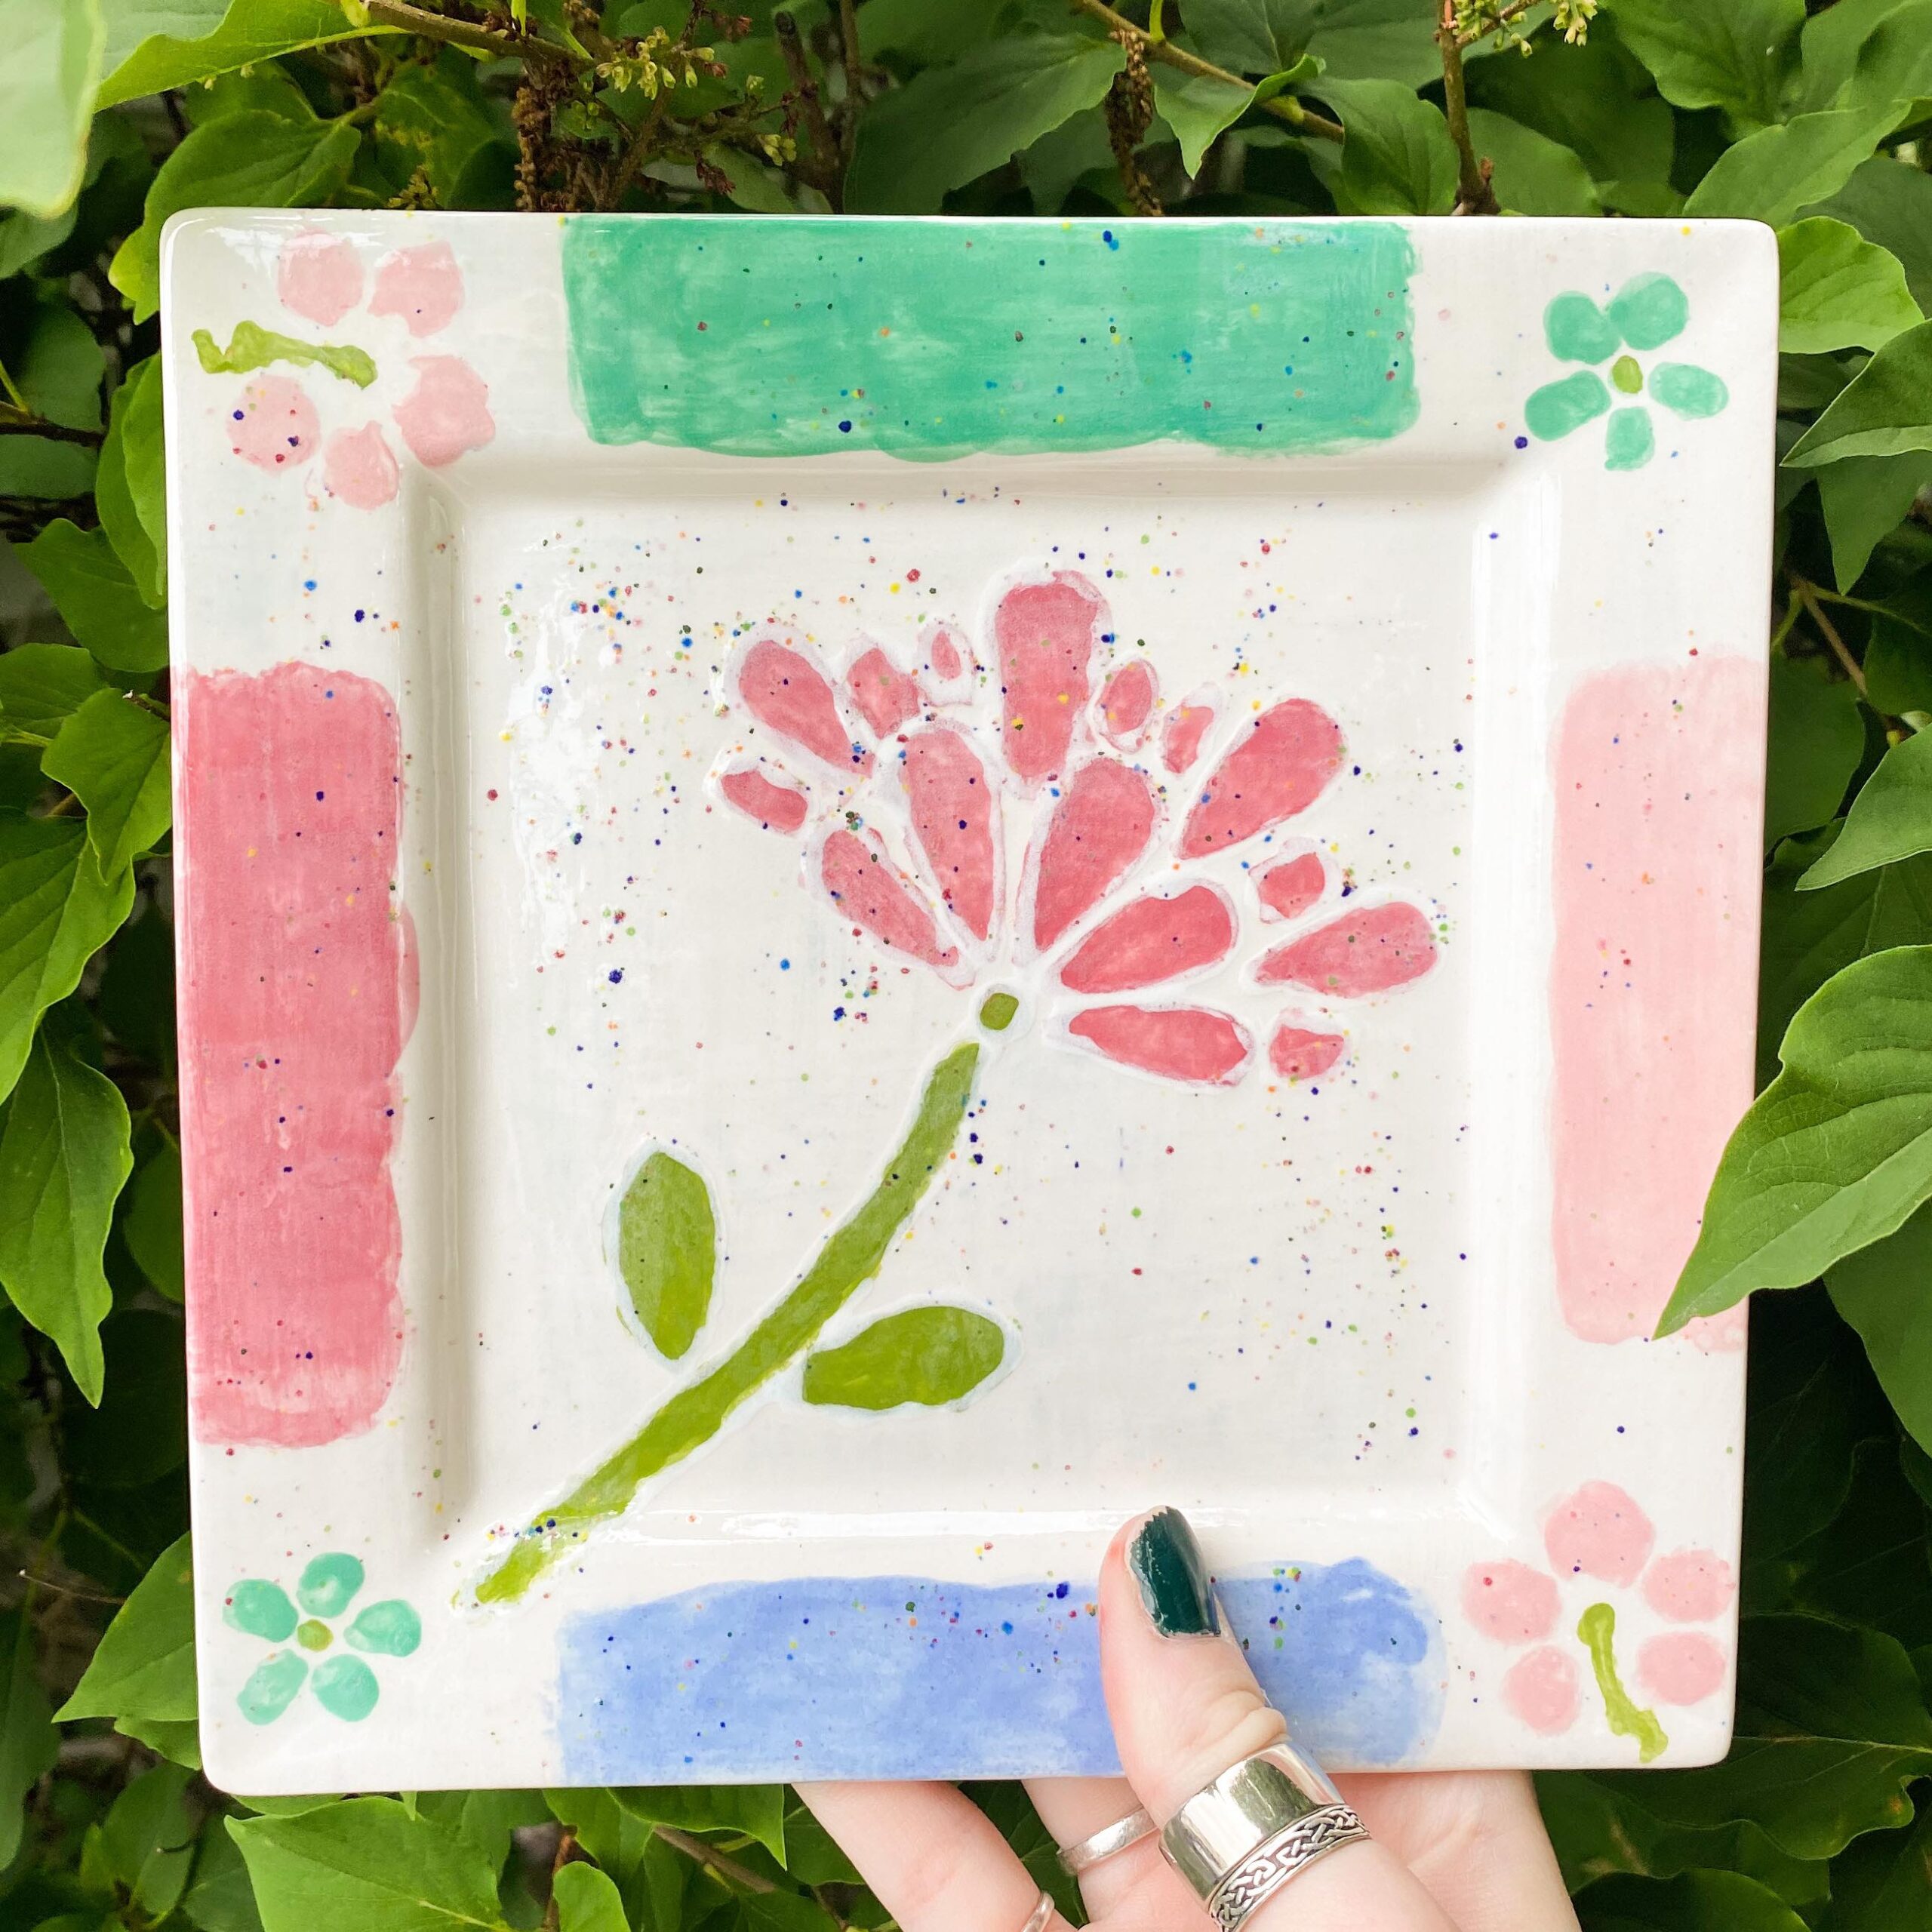 A hand holding up a plate with flowers on it.